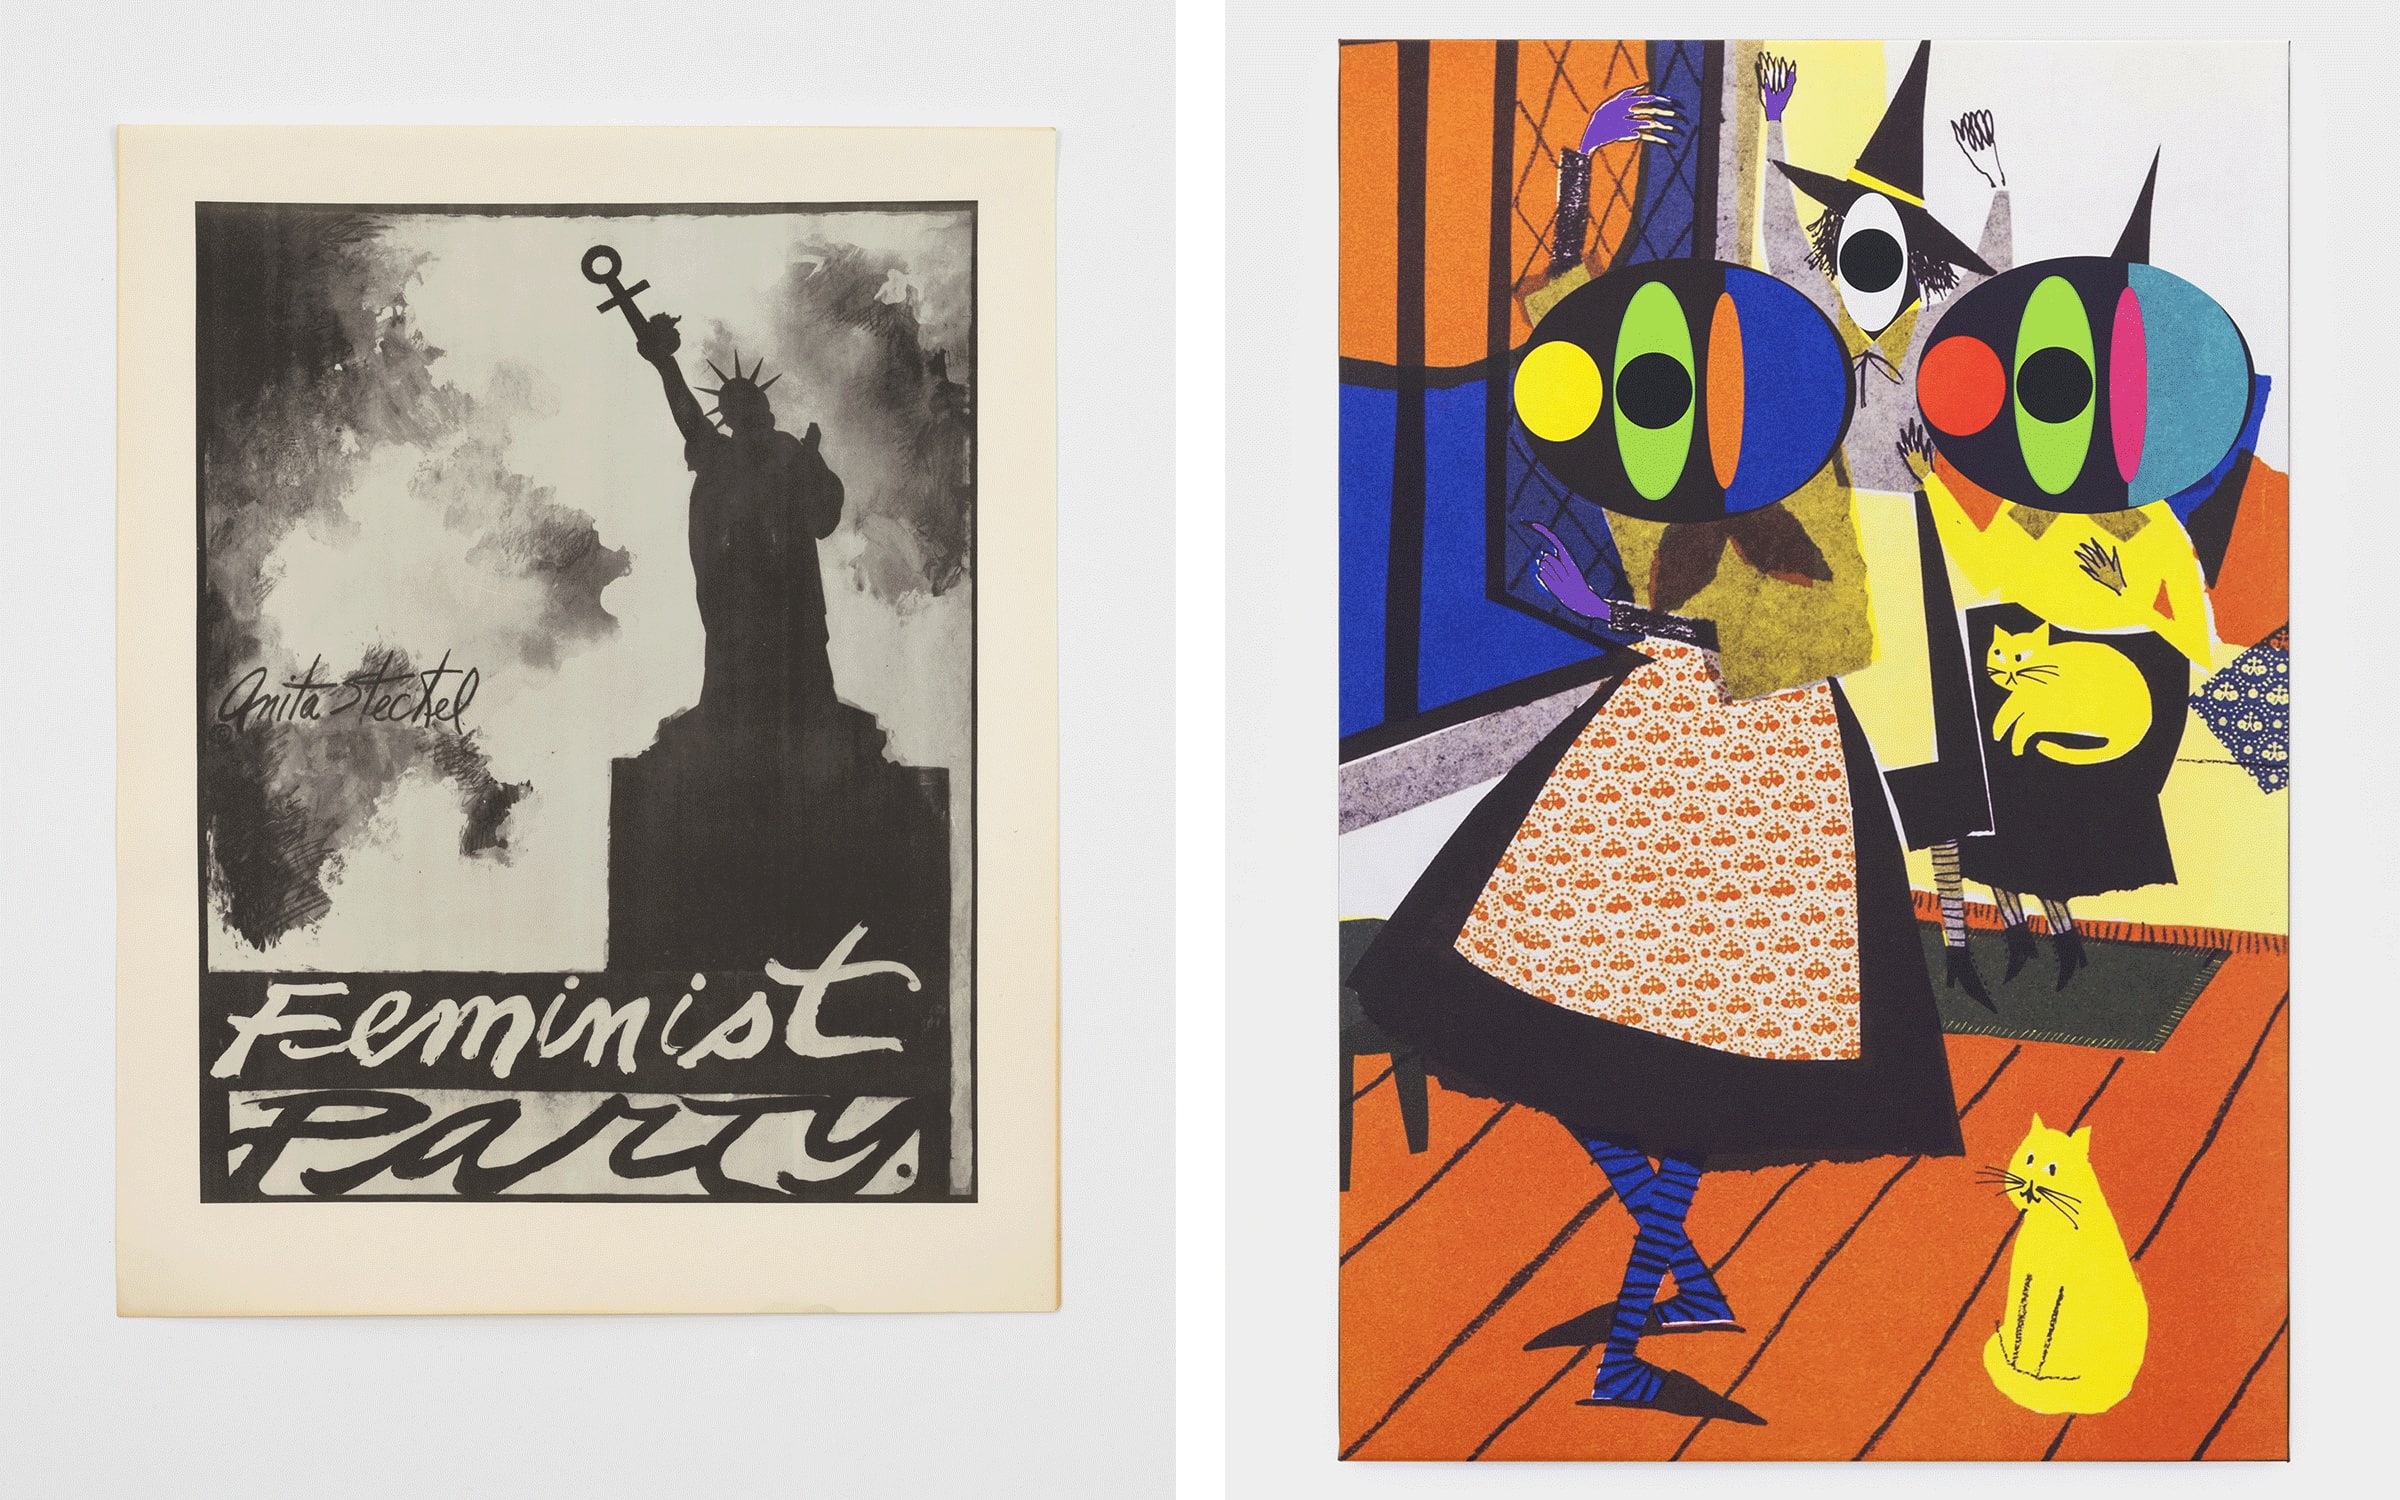 Left: Anita Steckel, Feminist Party poster, 1971. © The Estate of Anita Steckel. Courtesy of the Estate of Anita Steckel; Ortuzar Projects, New York; Hannah Hoffman Gallery, Los Angeles. Photograph by Dario Lasagni. Right: Ad Minoliti, Tres Brujas, 2020. Courtesy of the artist and Crèvecœur, Paris and MEYER*KAINER, Vienna.